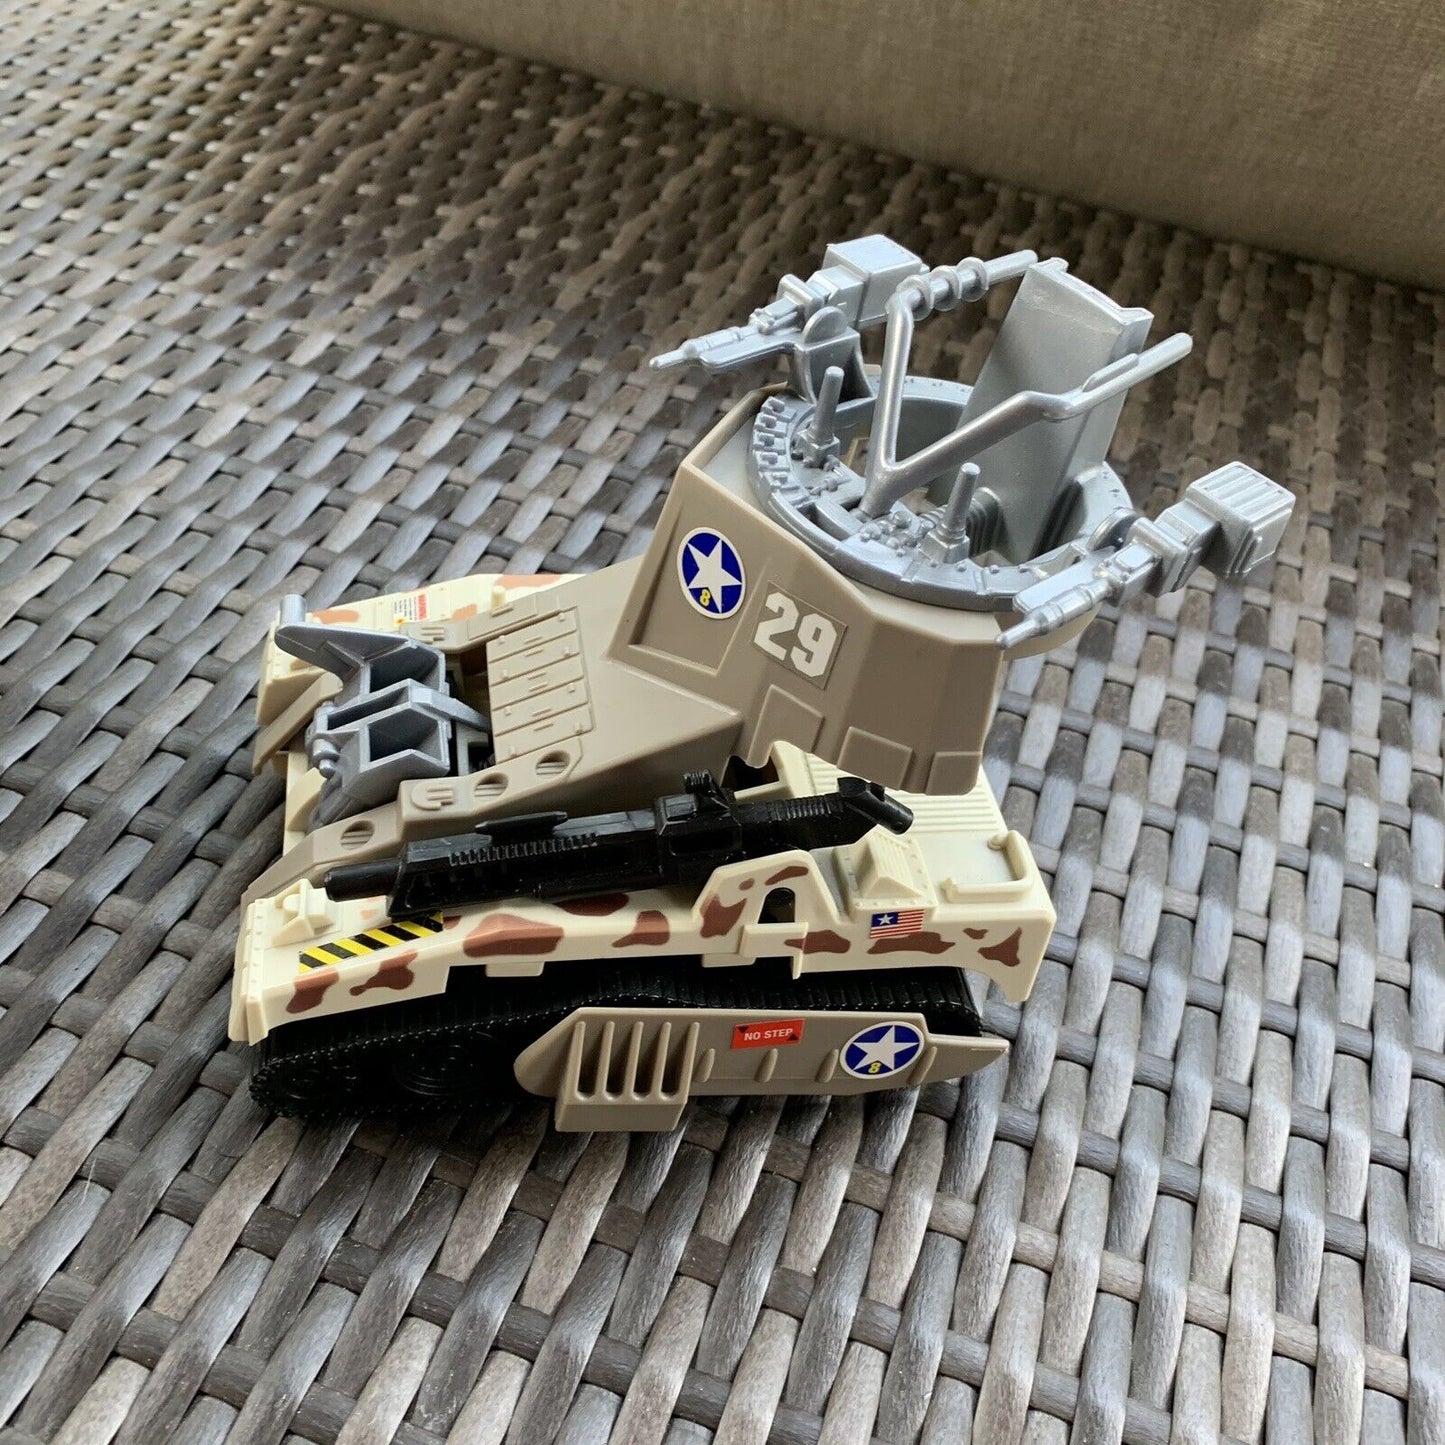 1993 Kenner Aliens Space Marine Hover Tread Toy Vehicle Loose